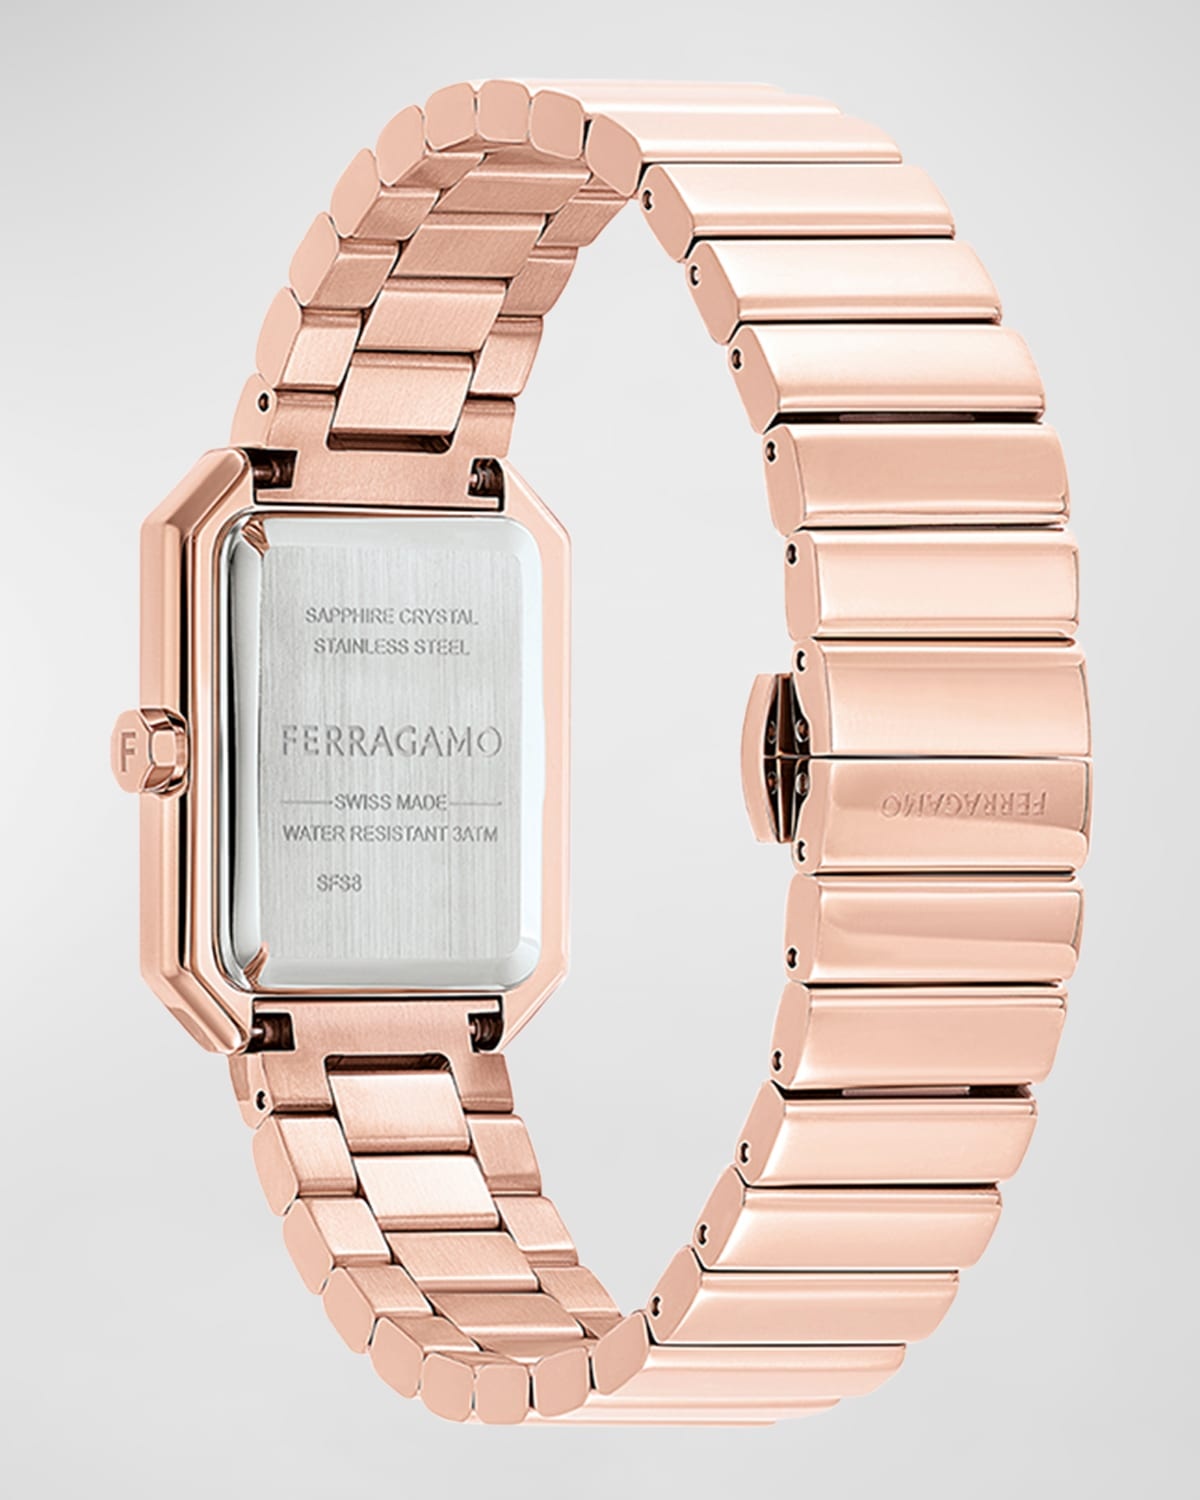 26.5x33.5mm Ferragamo Crystal Watch with Rose Gold Dial - 3